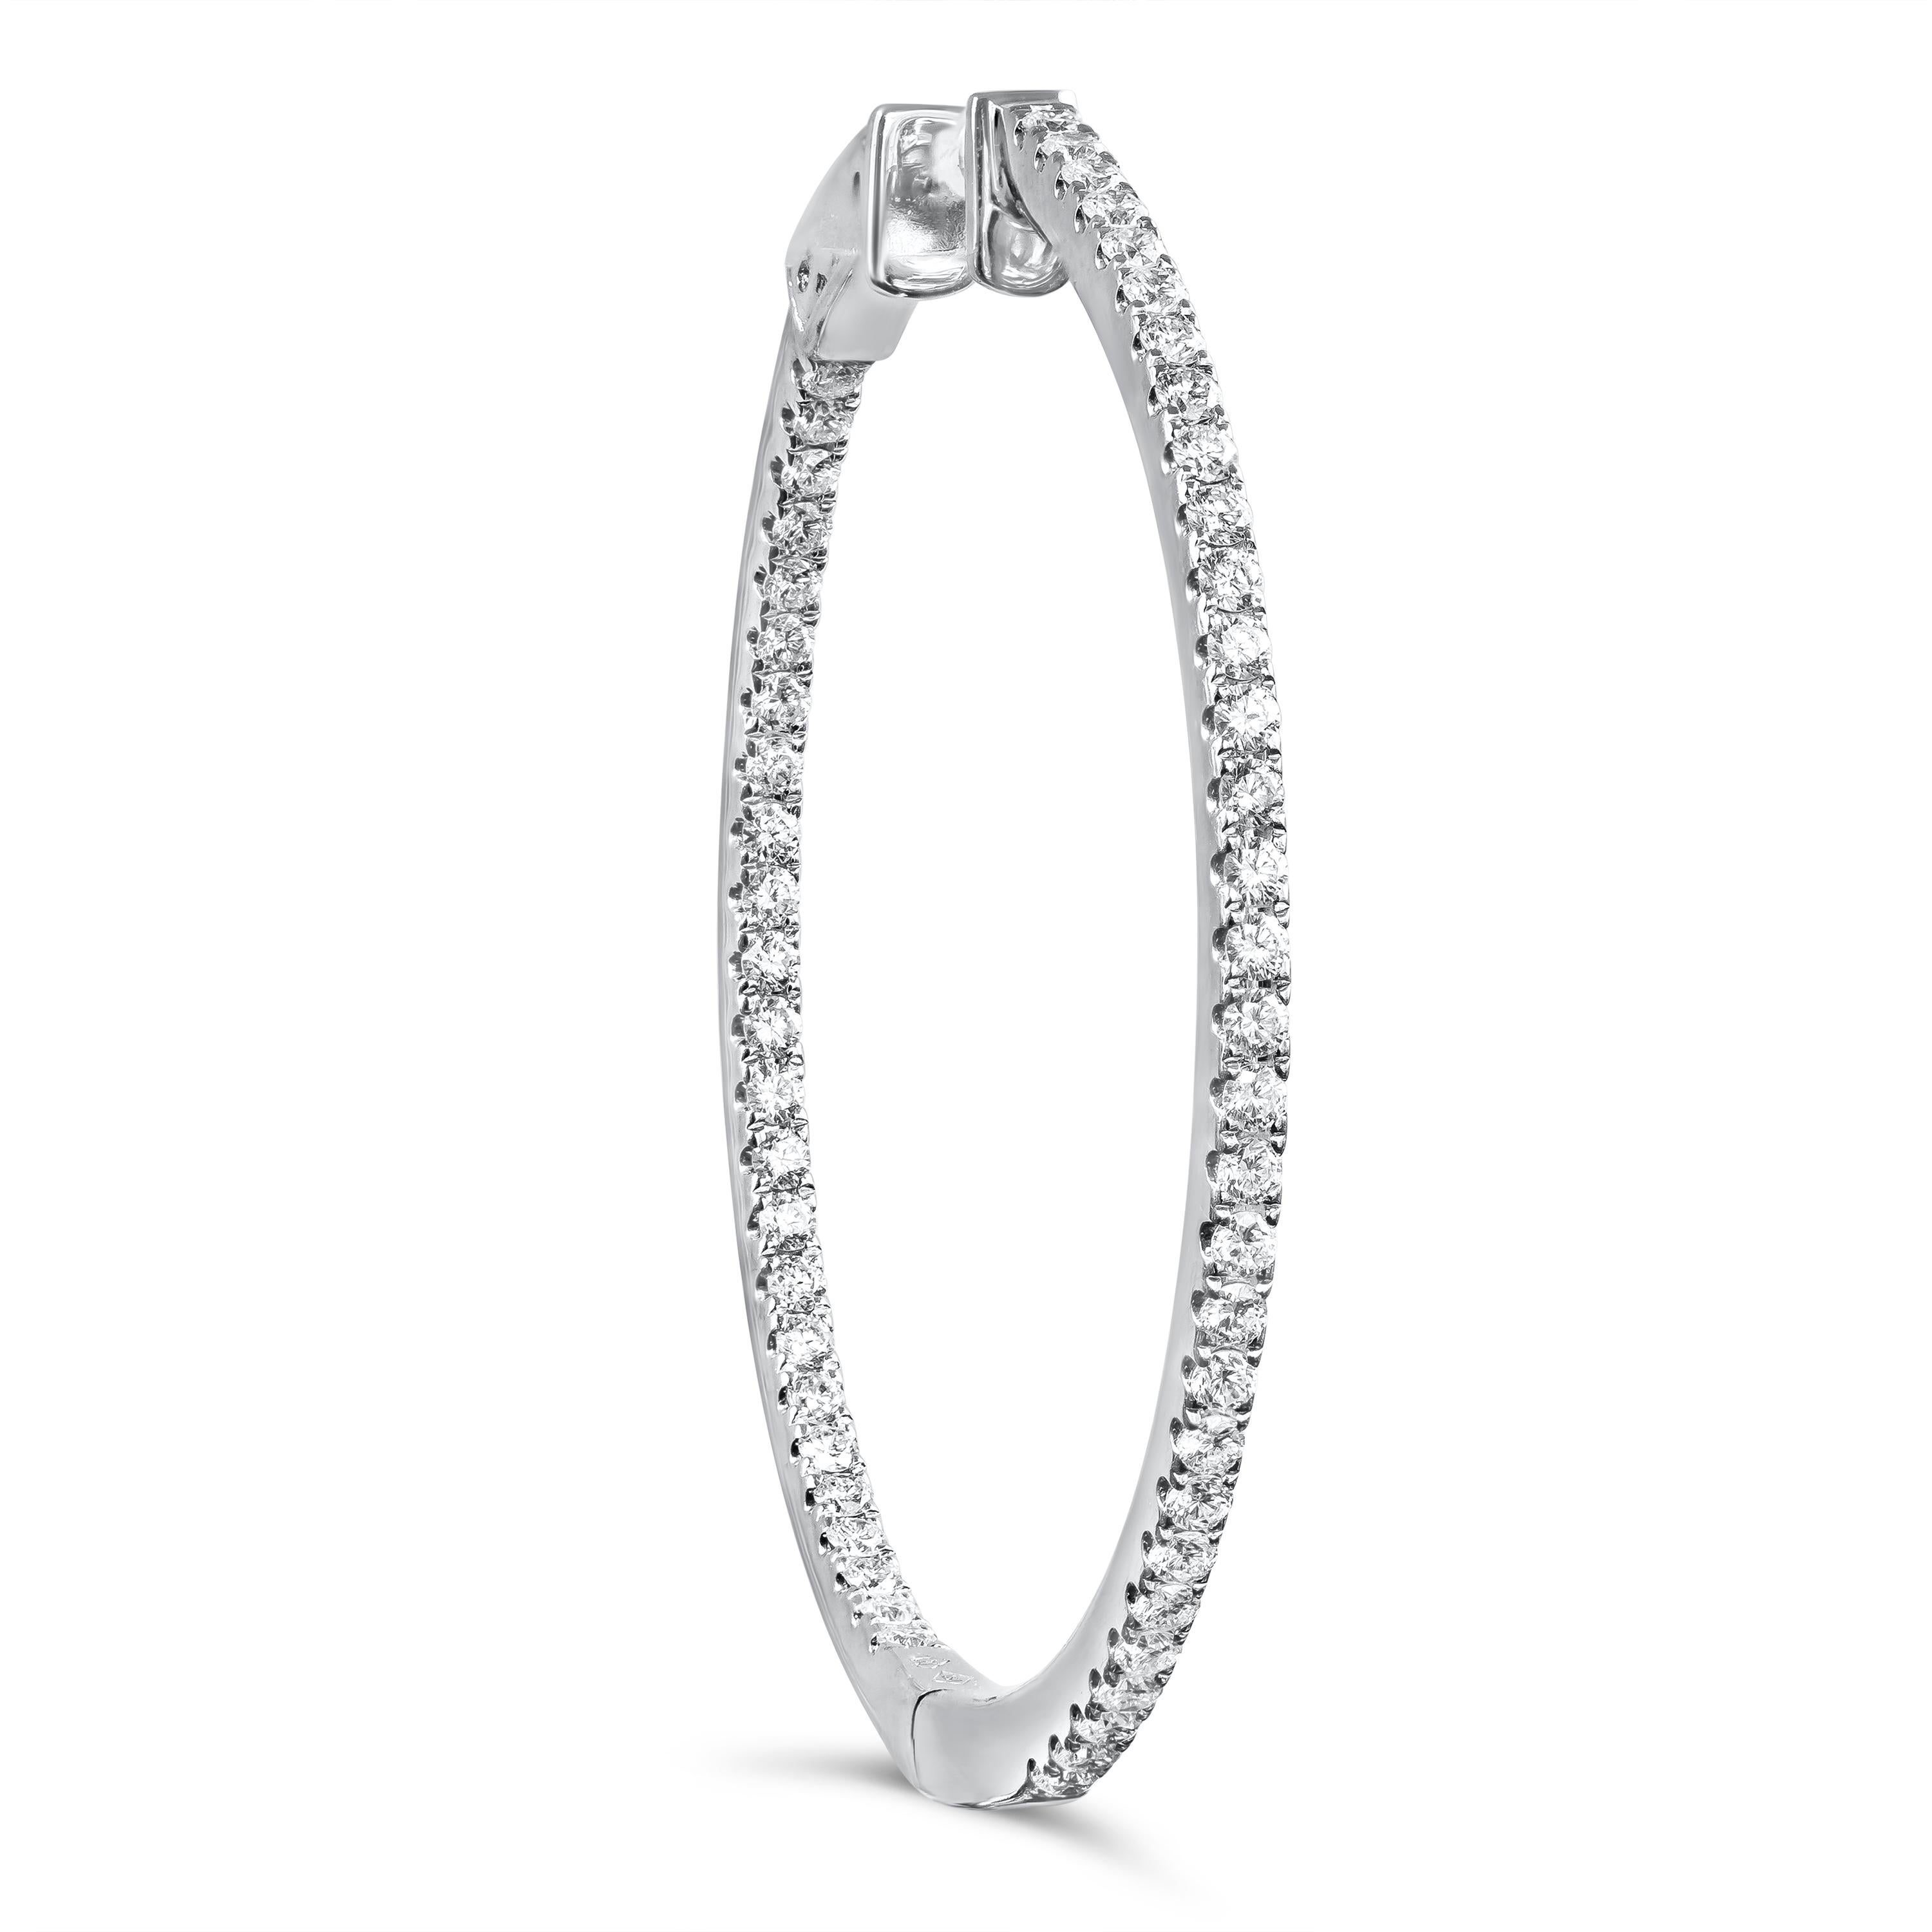 A simple yet lustrous pair of hoop earrings showcasing 1.51 carats of round brilliant diamonds scalloped pave set on an 18 karat white gold. Approximately 1.75 inches in length. 

Roman Malakov is a custom house, specializing in creating anything